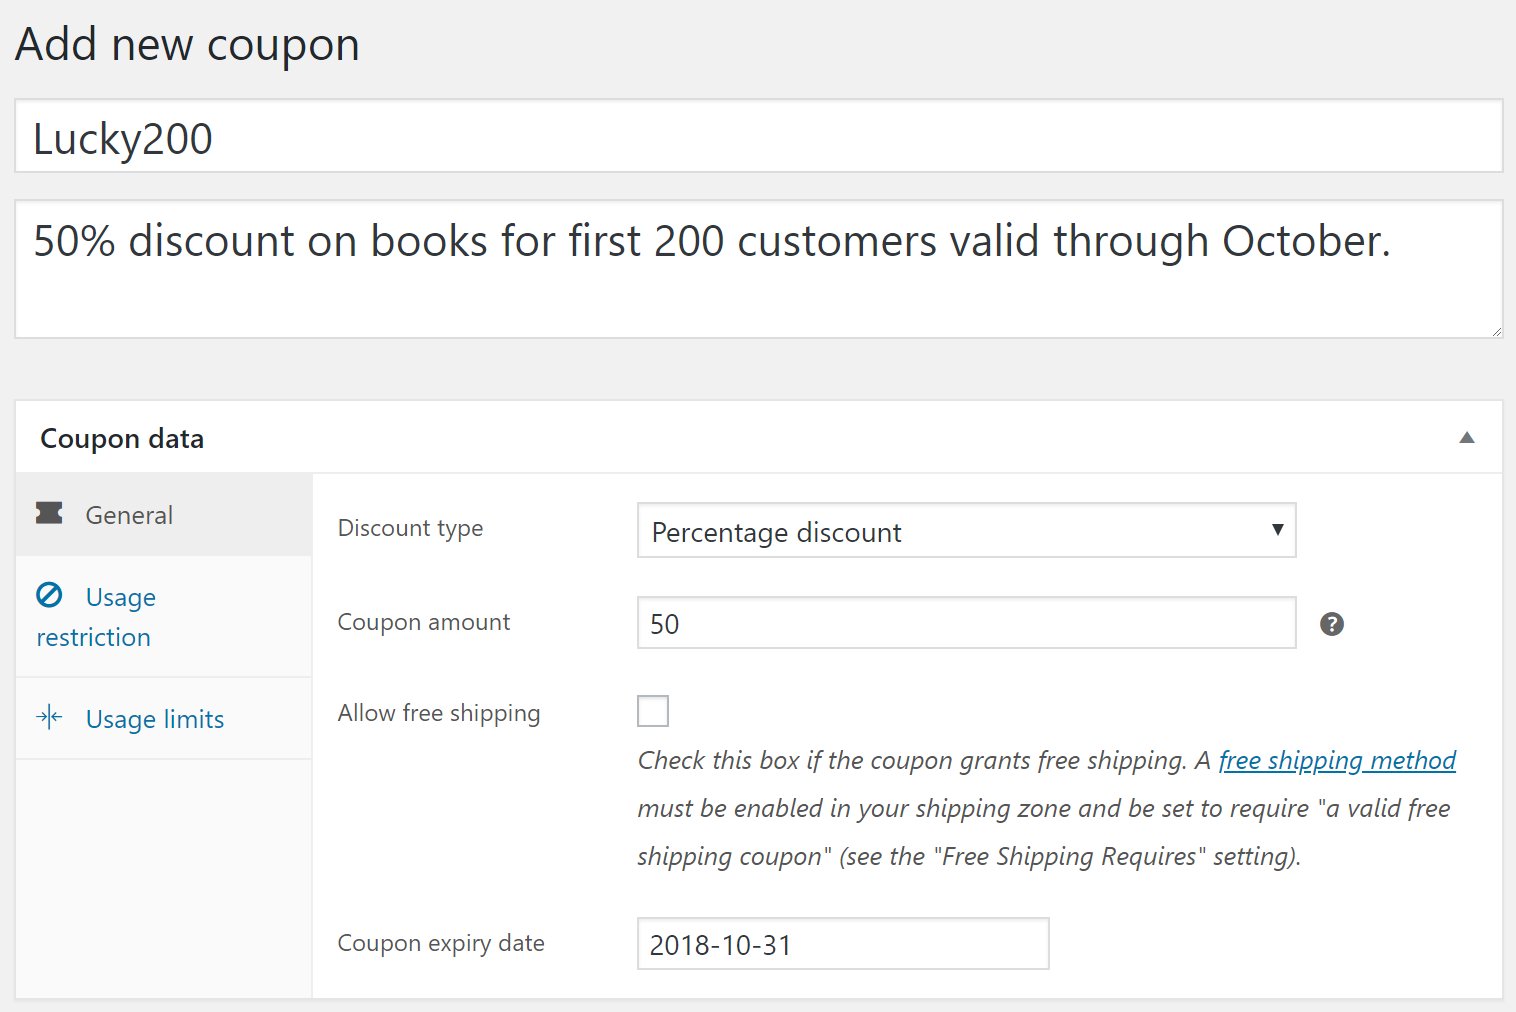 Choose from three discount types, set a discount amount and expiry date when creating a new coupon